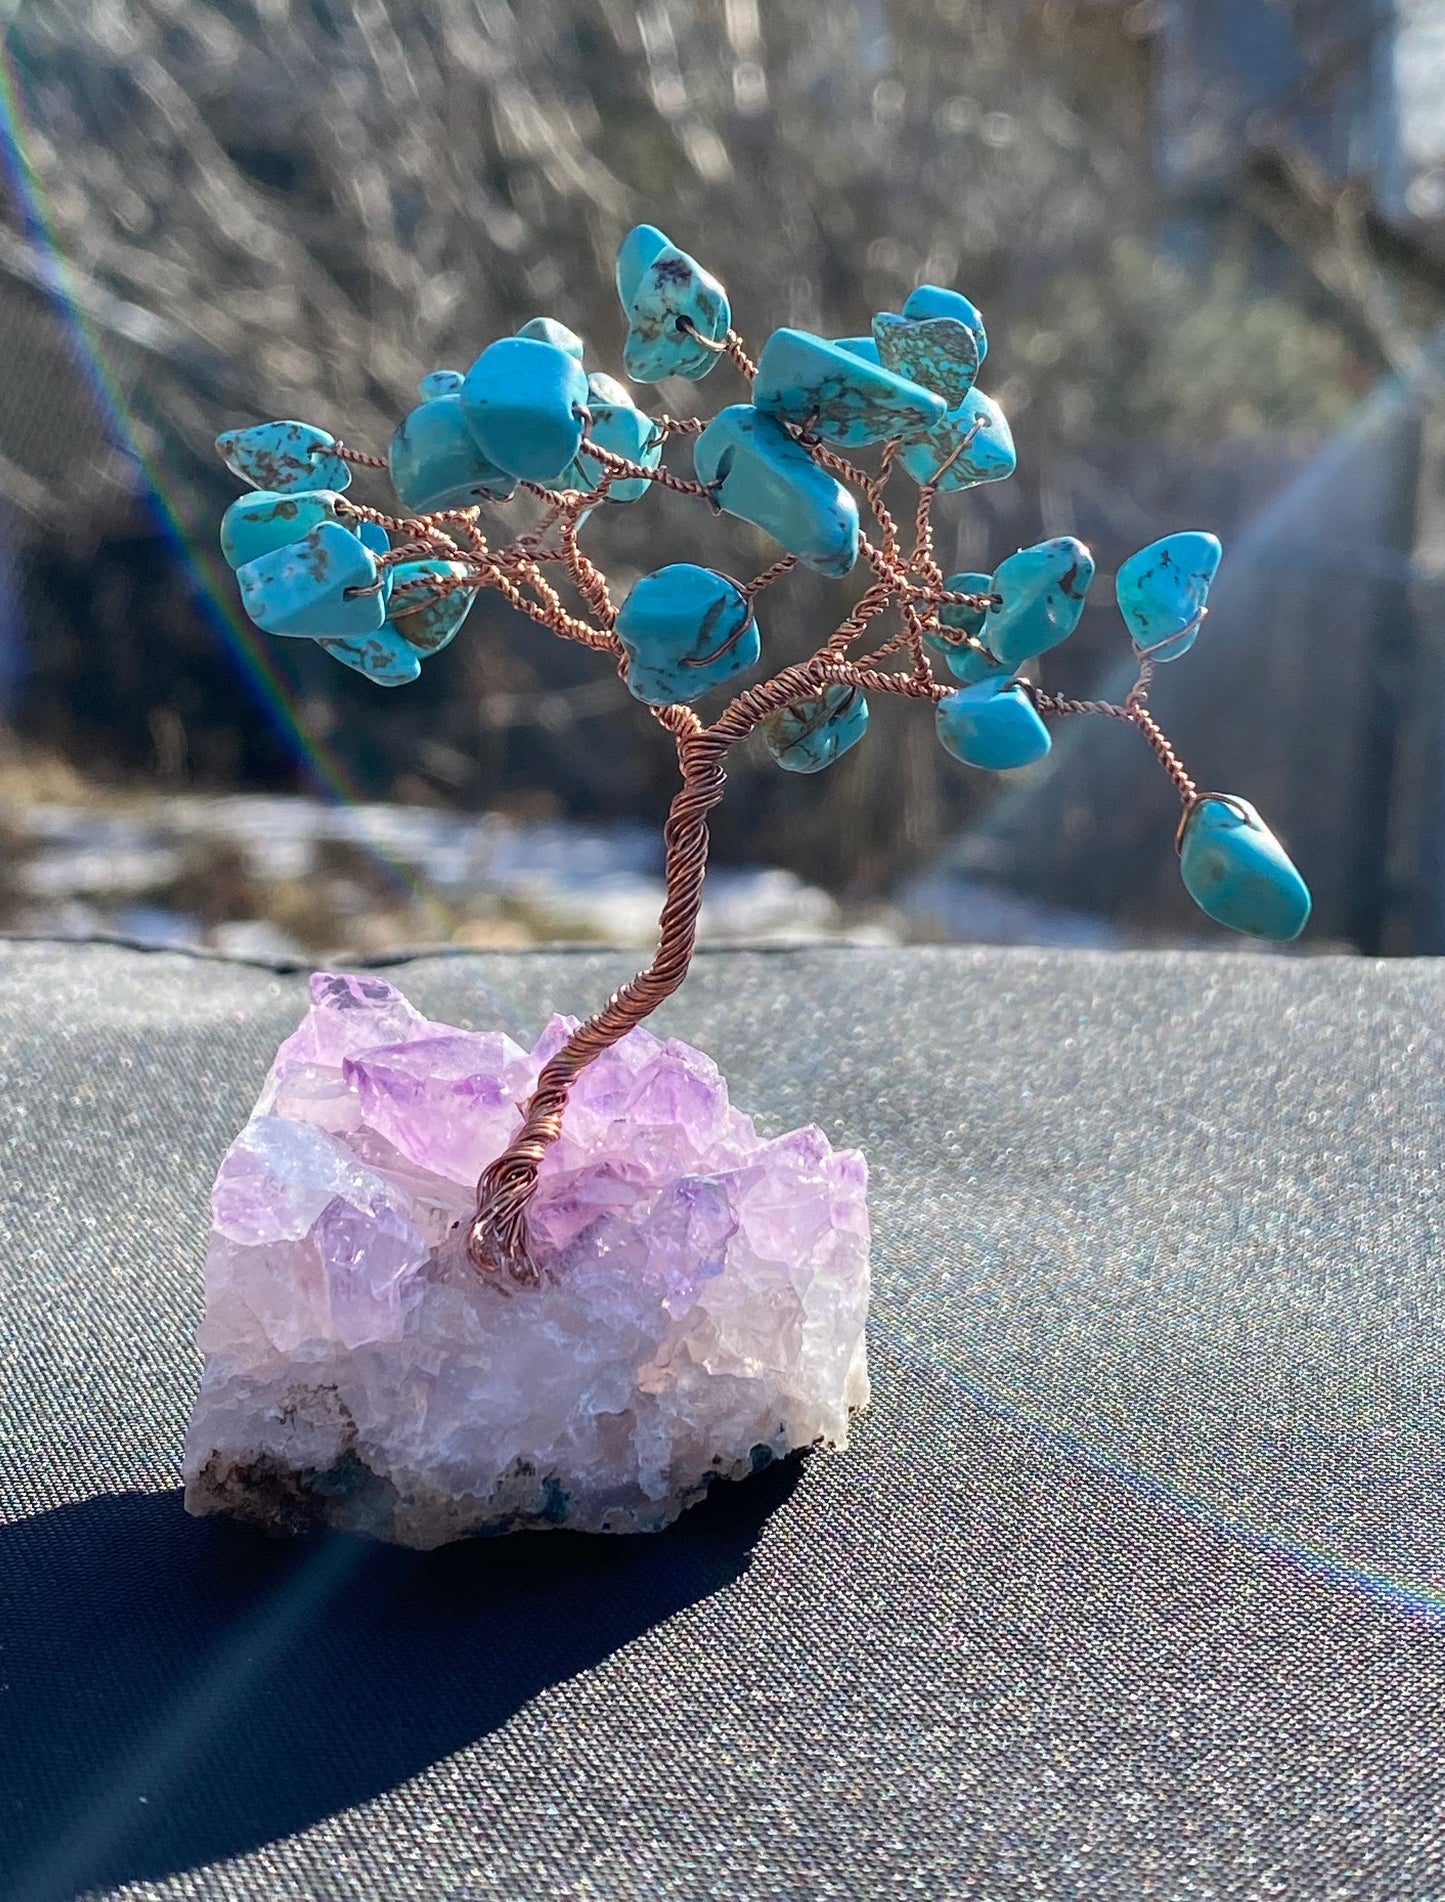 Mini turquoise bonsai on amethyst, Mother's Day, reiki, crystal gift